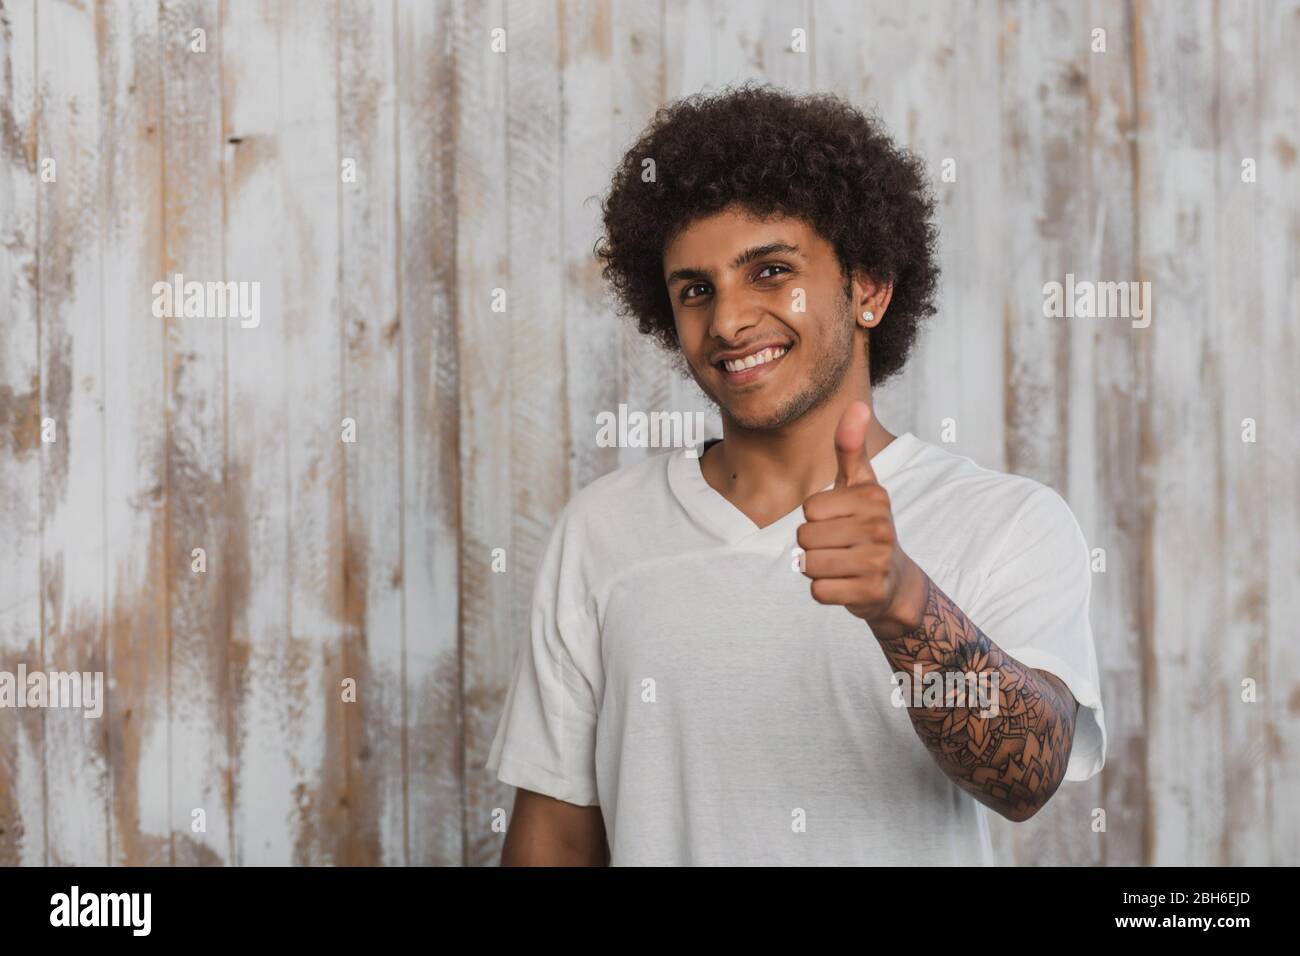 Positive curly haired man with beautiful tattoo showing thumbs up. While standing against old wooden background Stock Photo